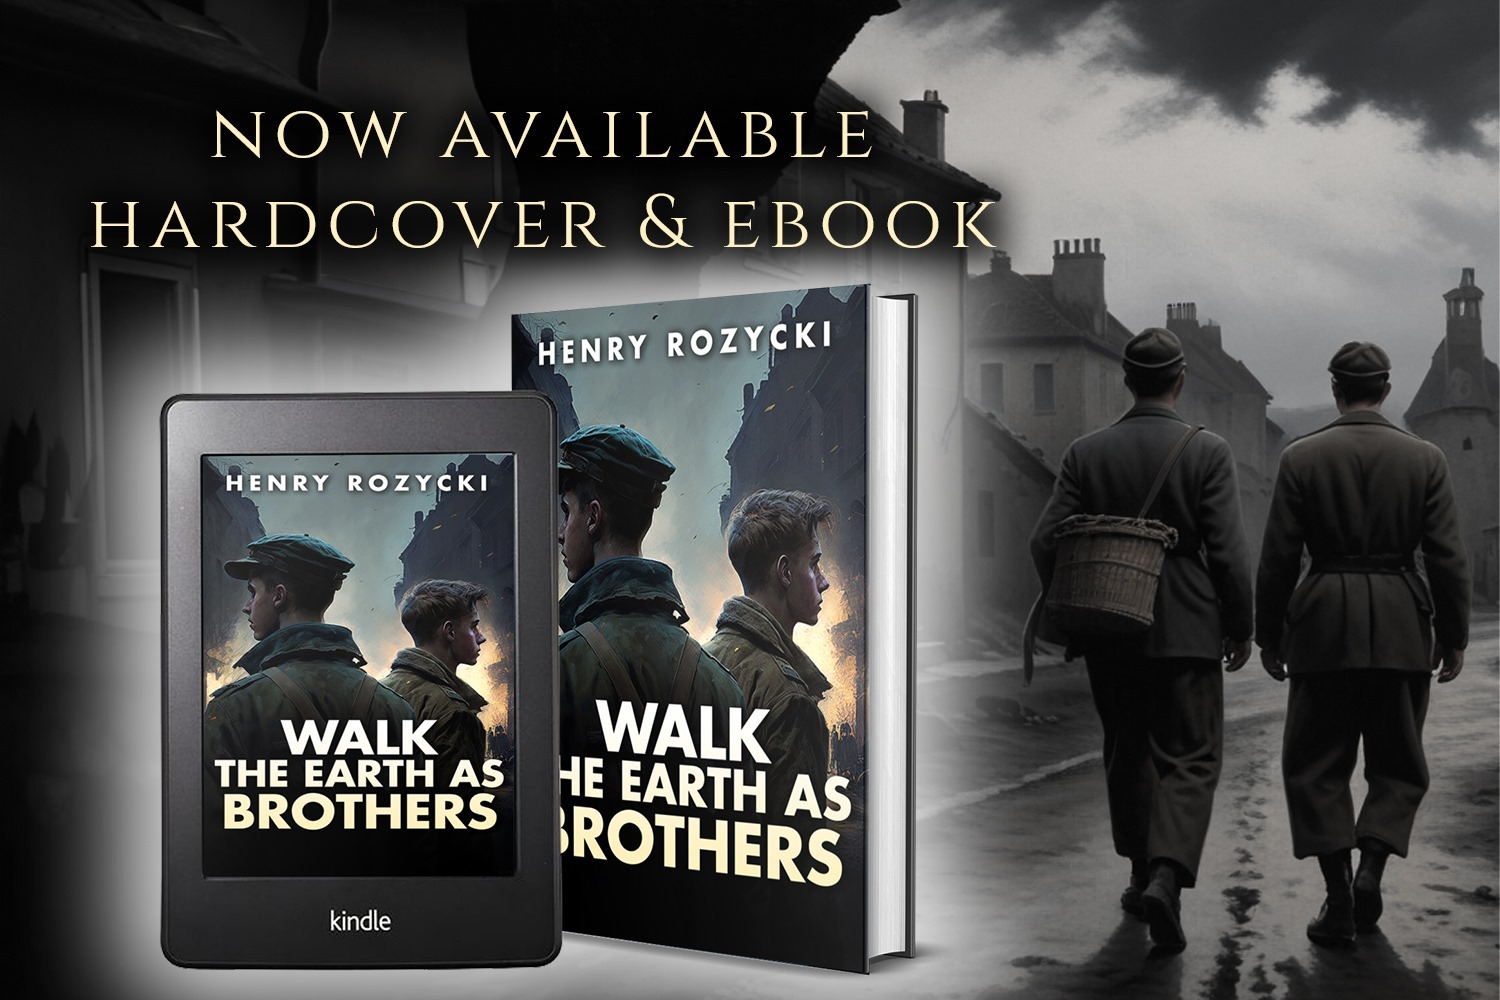 Walk the Earth as Brothers by Henry Rozycki, now available from Histria Books